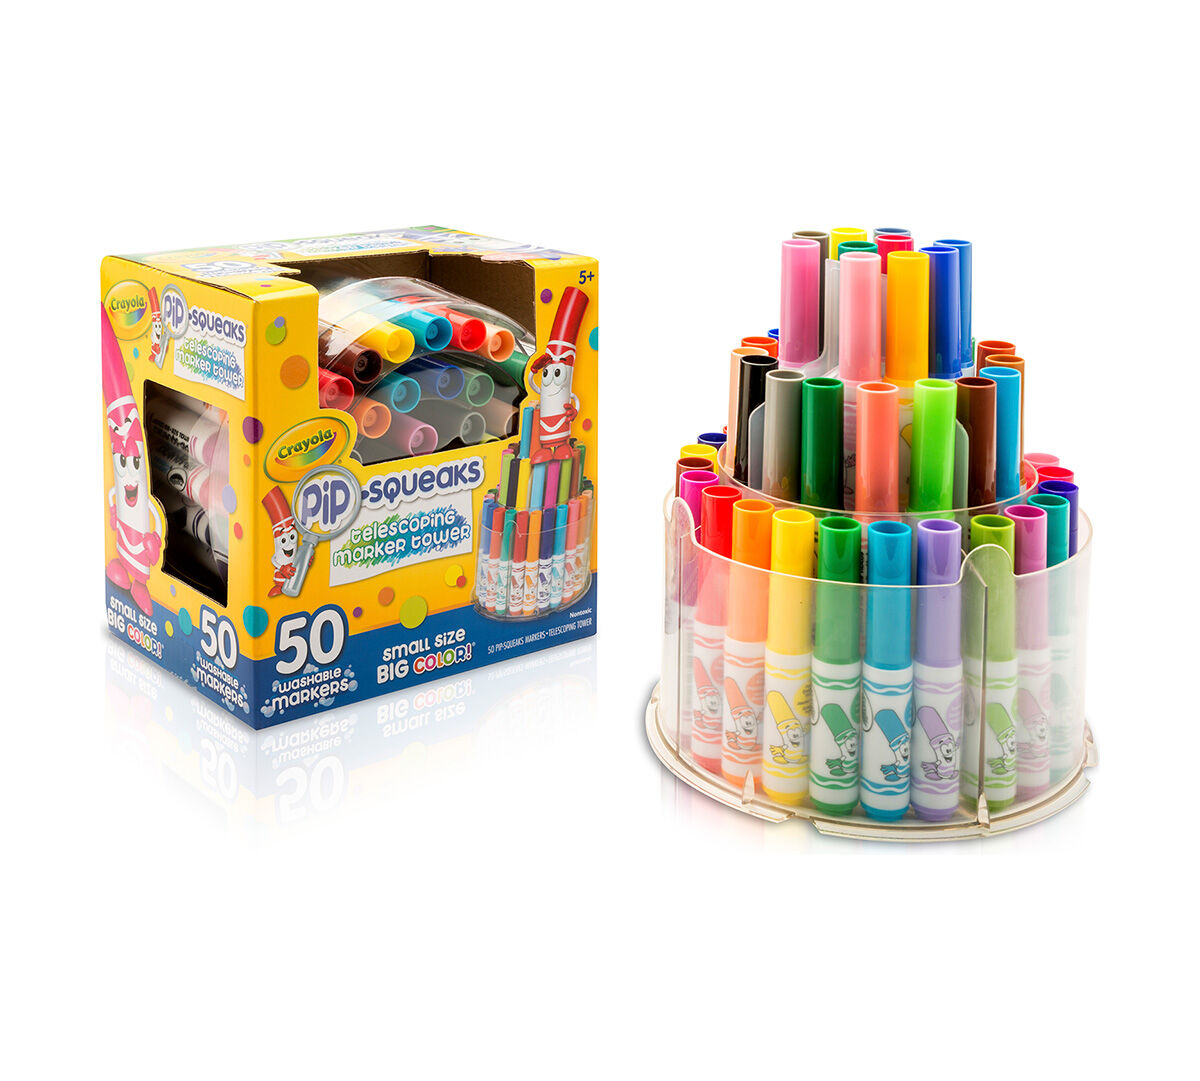 Pip-Squeaks Telescoping Marker Tower 50 Count | Crayola